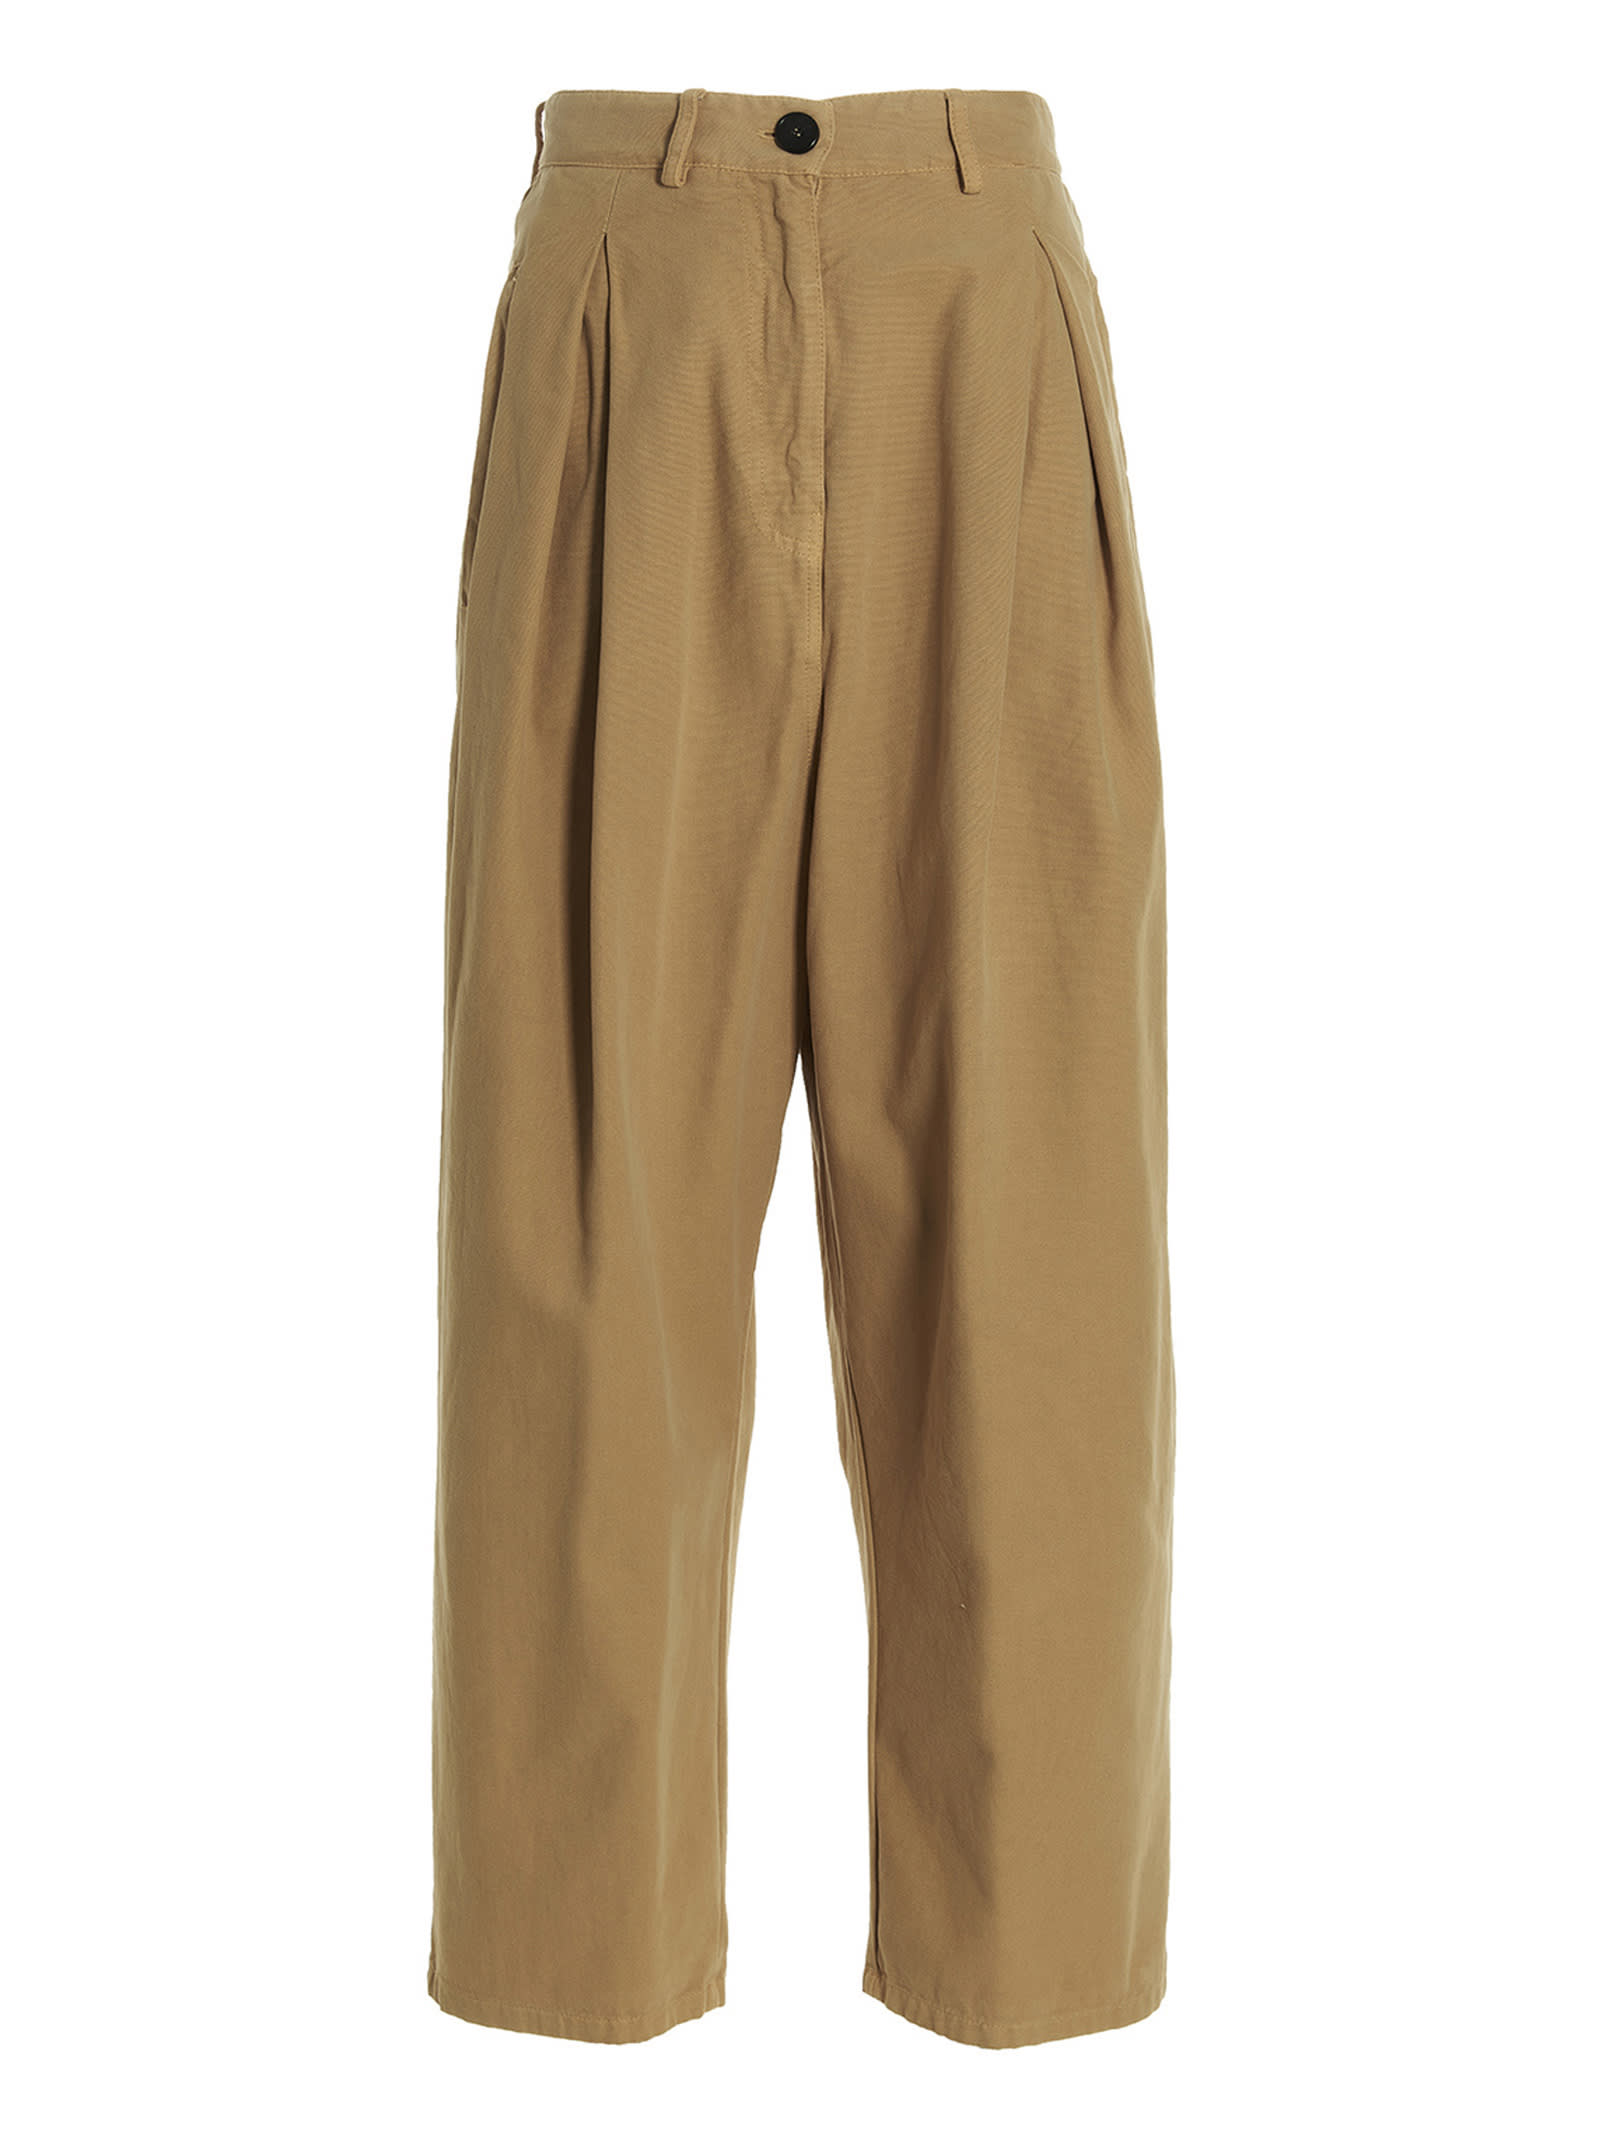 Jucca Cropped Pants